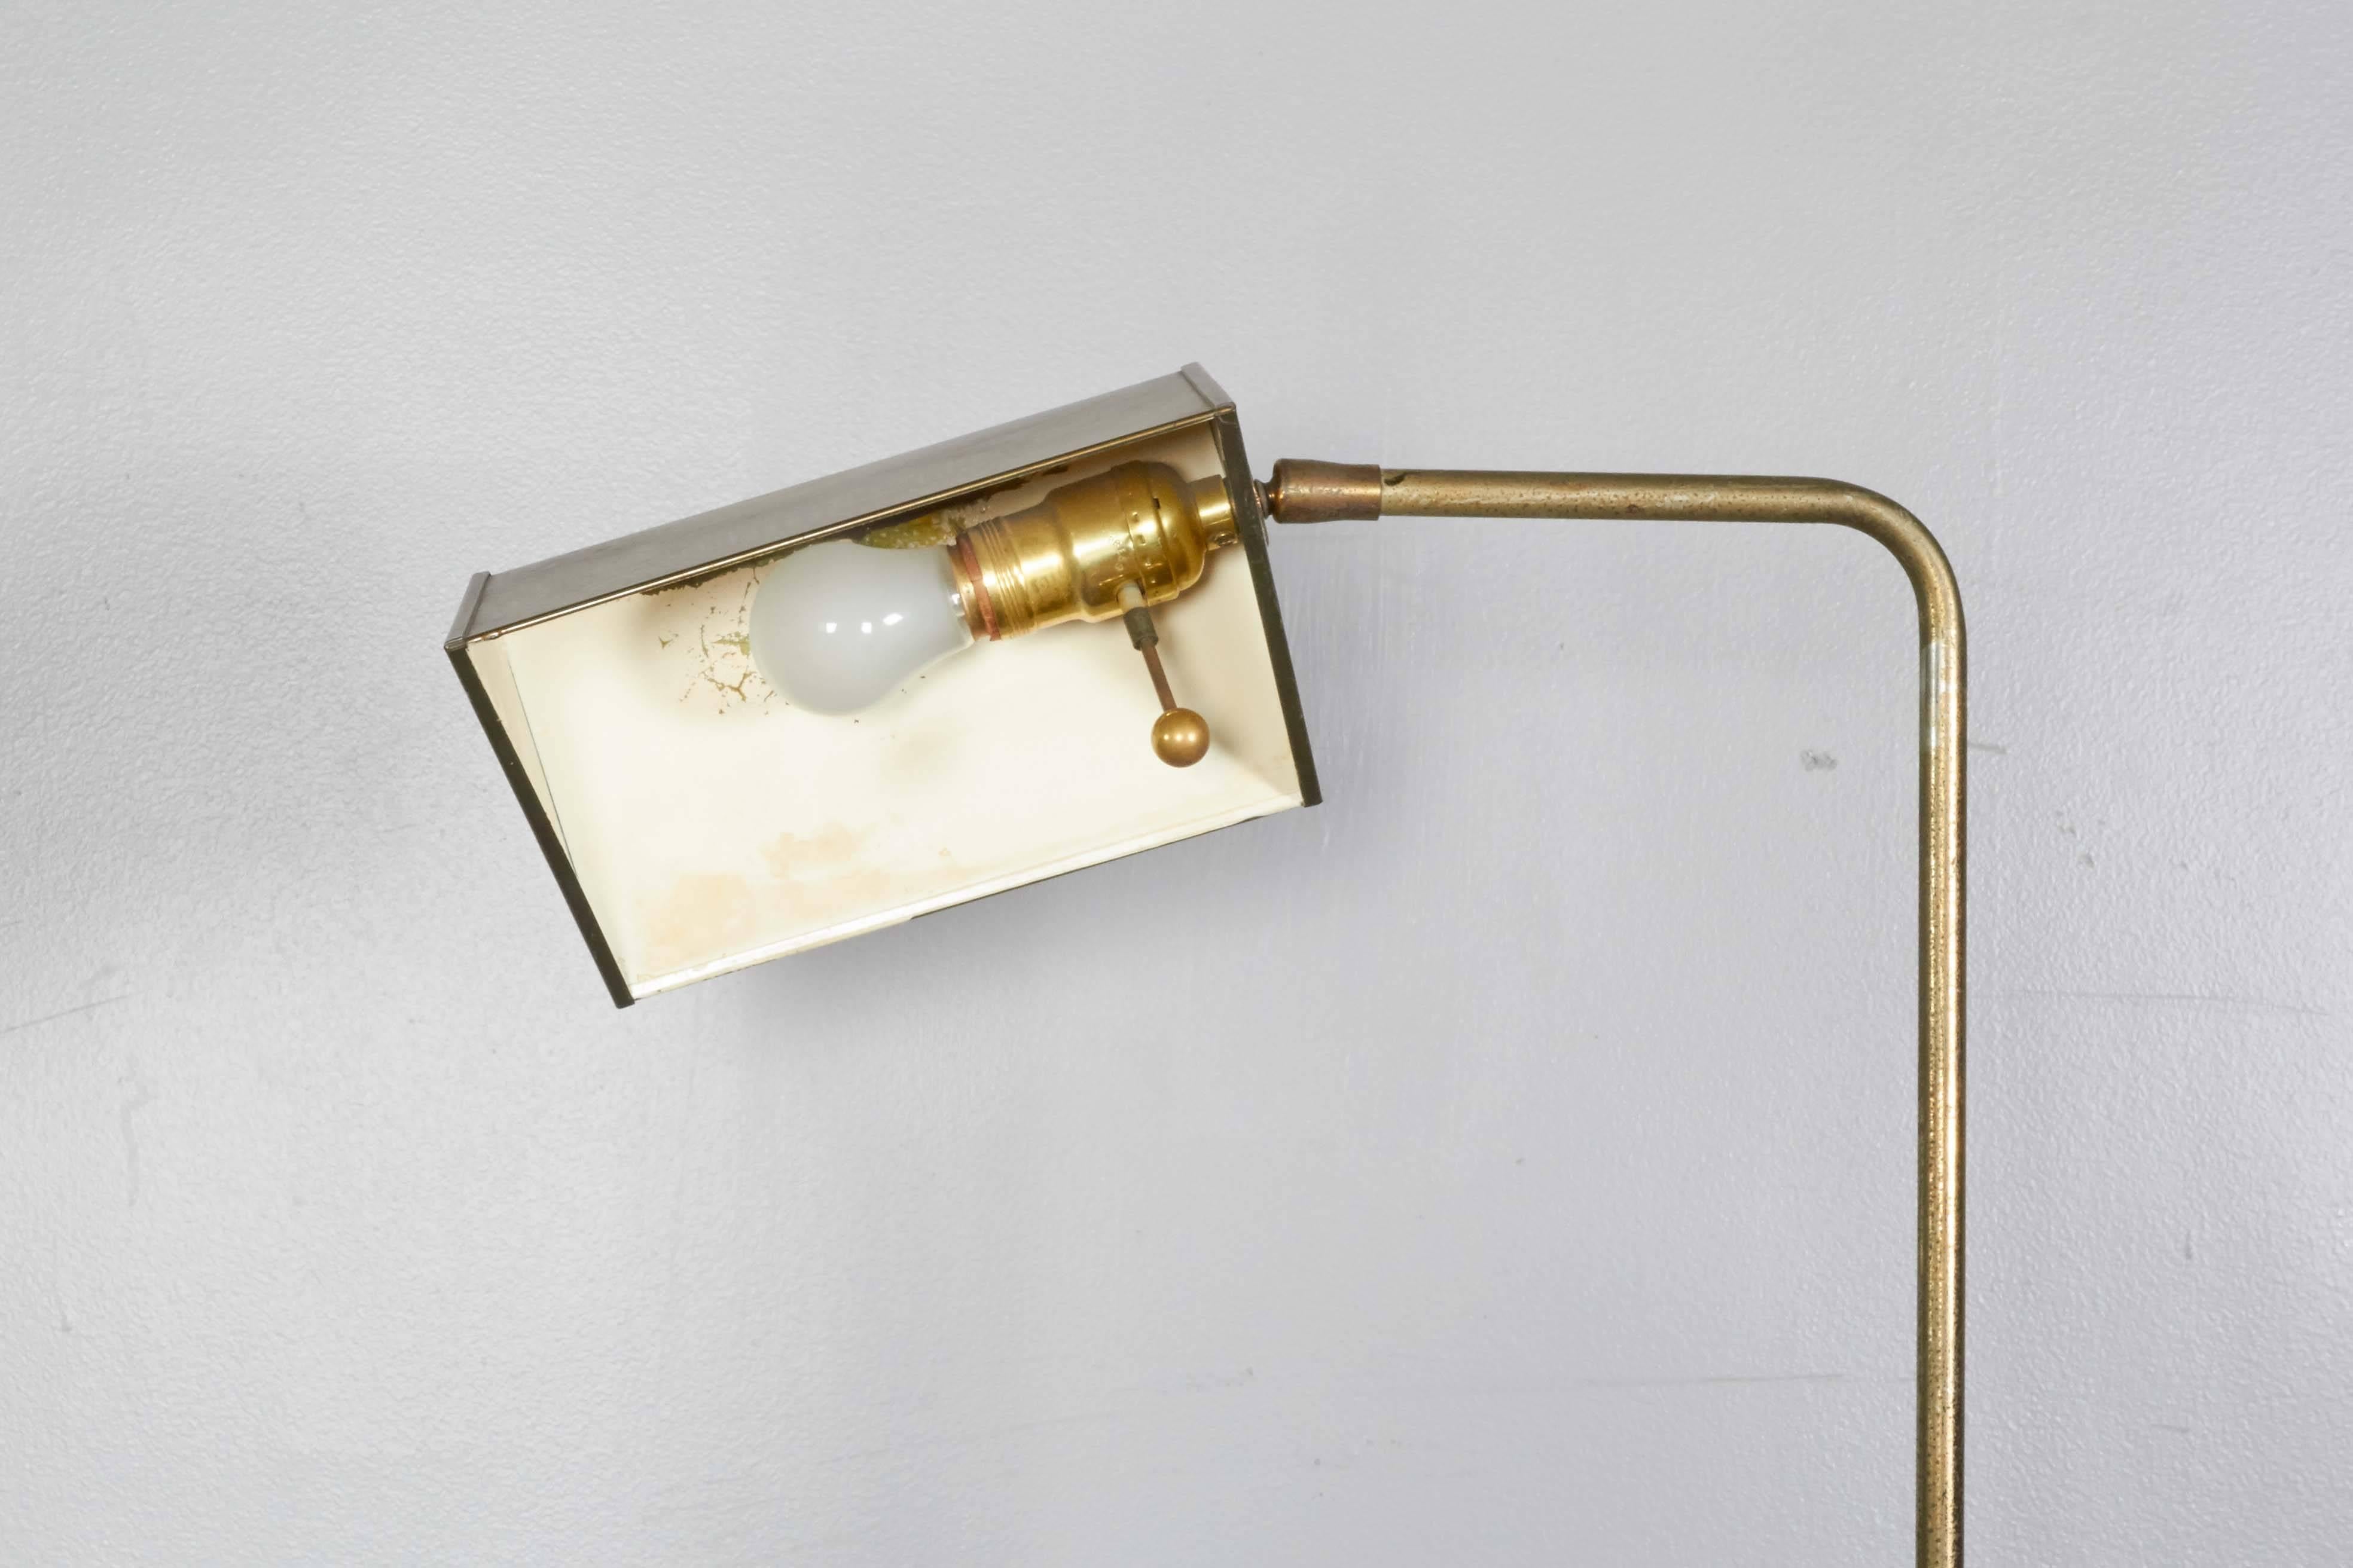 A brass circa 1960s pharmacy floor lamp, tent form shade with trimmed border and white enamel interior, on adjustable curved stem and round base. Good vintage condition, with age appropriate patina and wear to enamel interior, scratch to base.